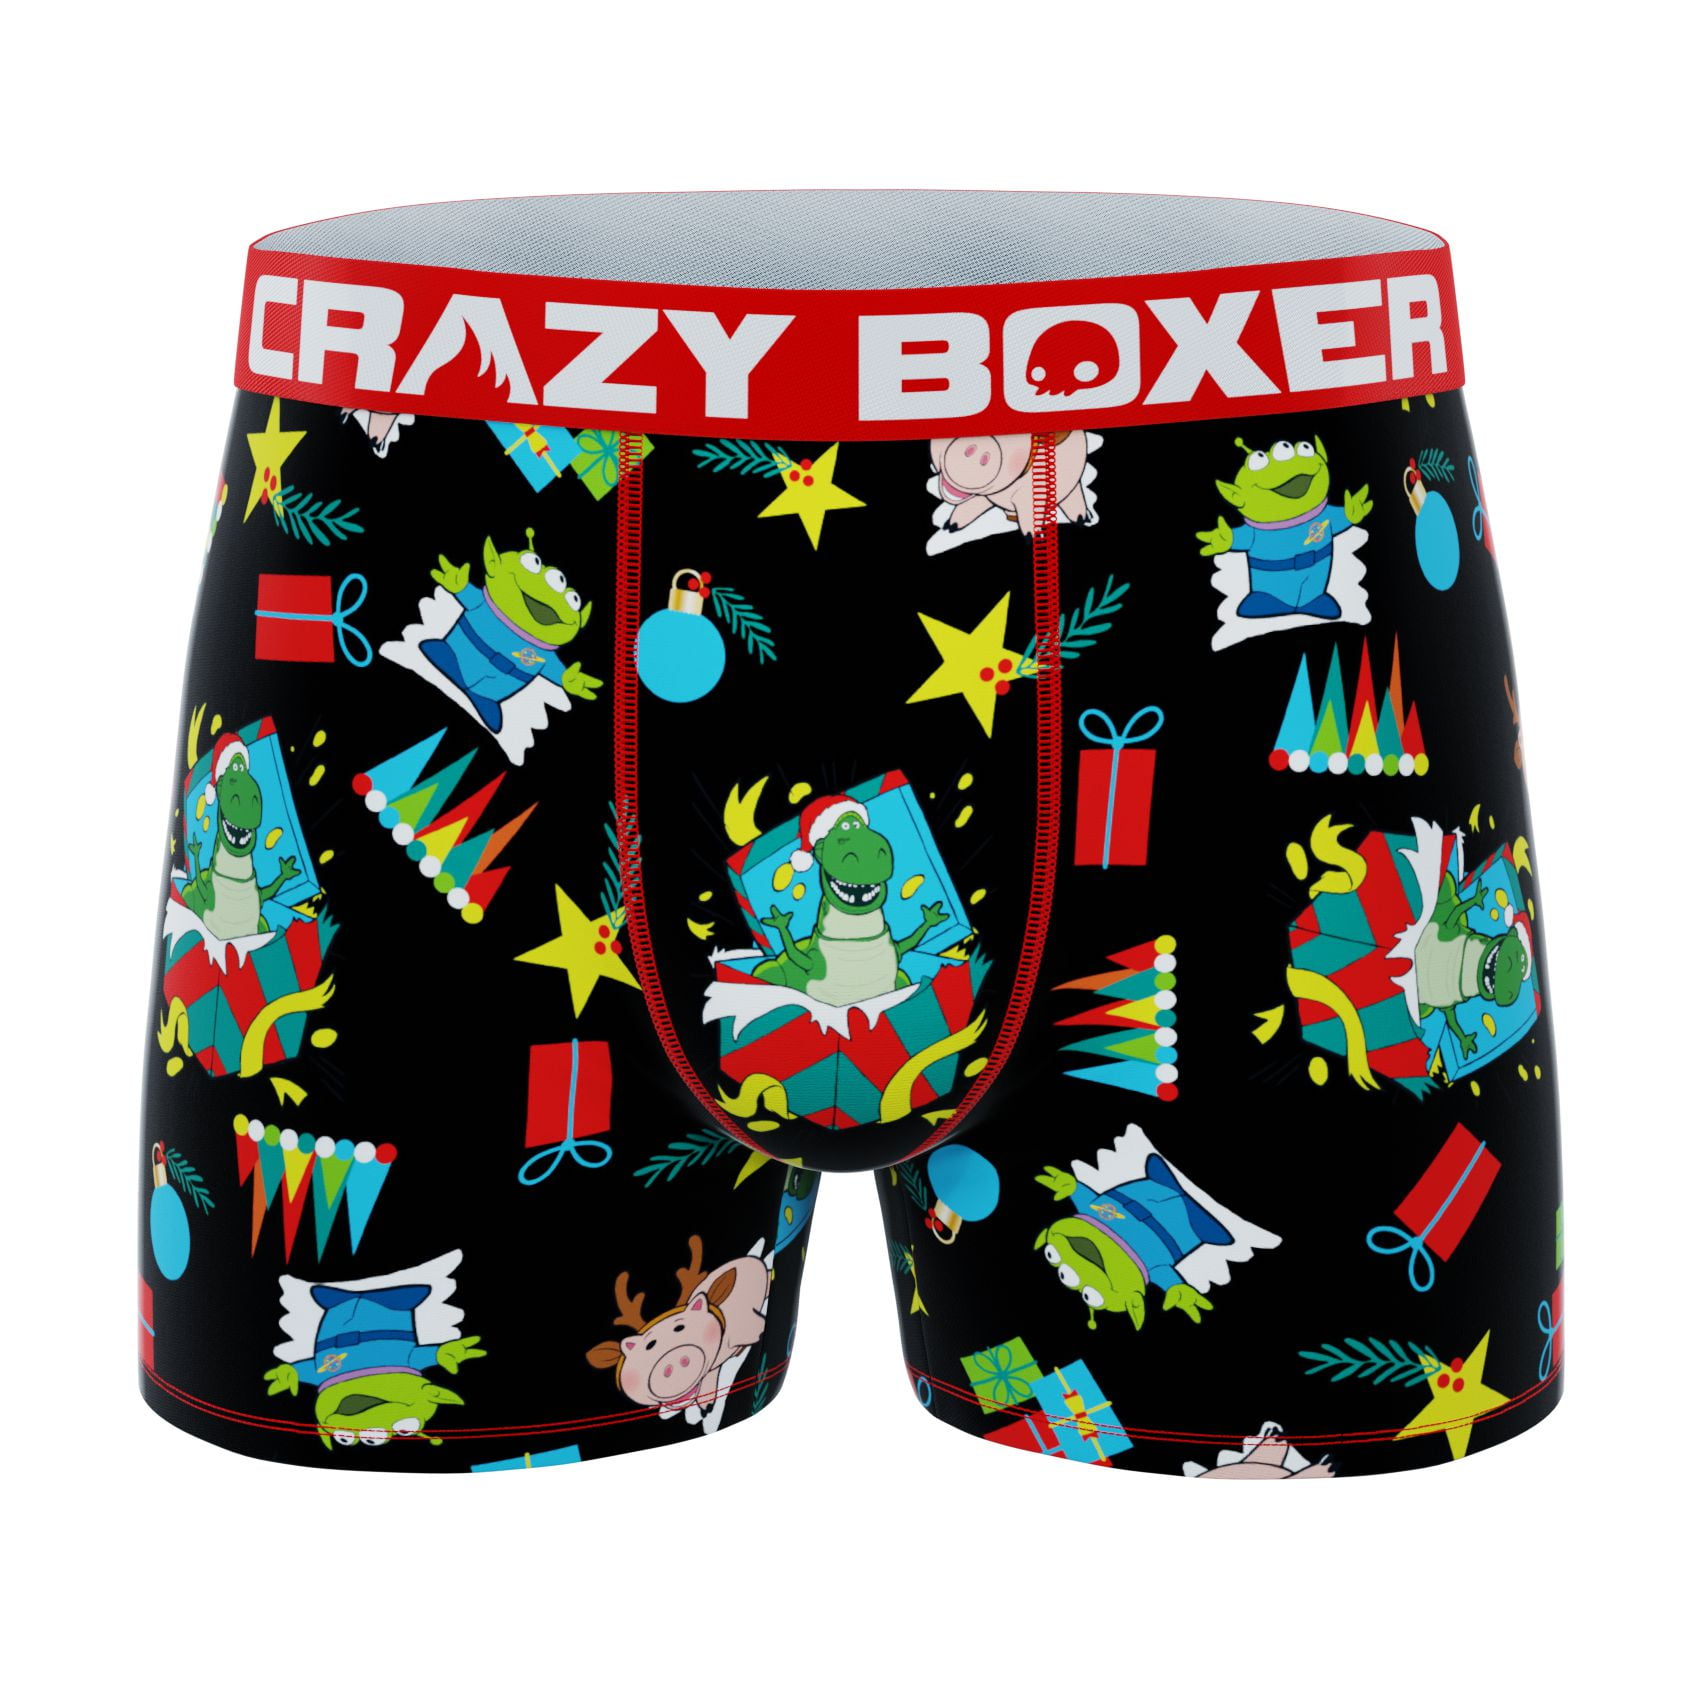 CRAZYBOXER Men's Underwear Toy Story Resistant Perfect fit Boxer Brief  Comfortable